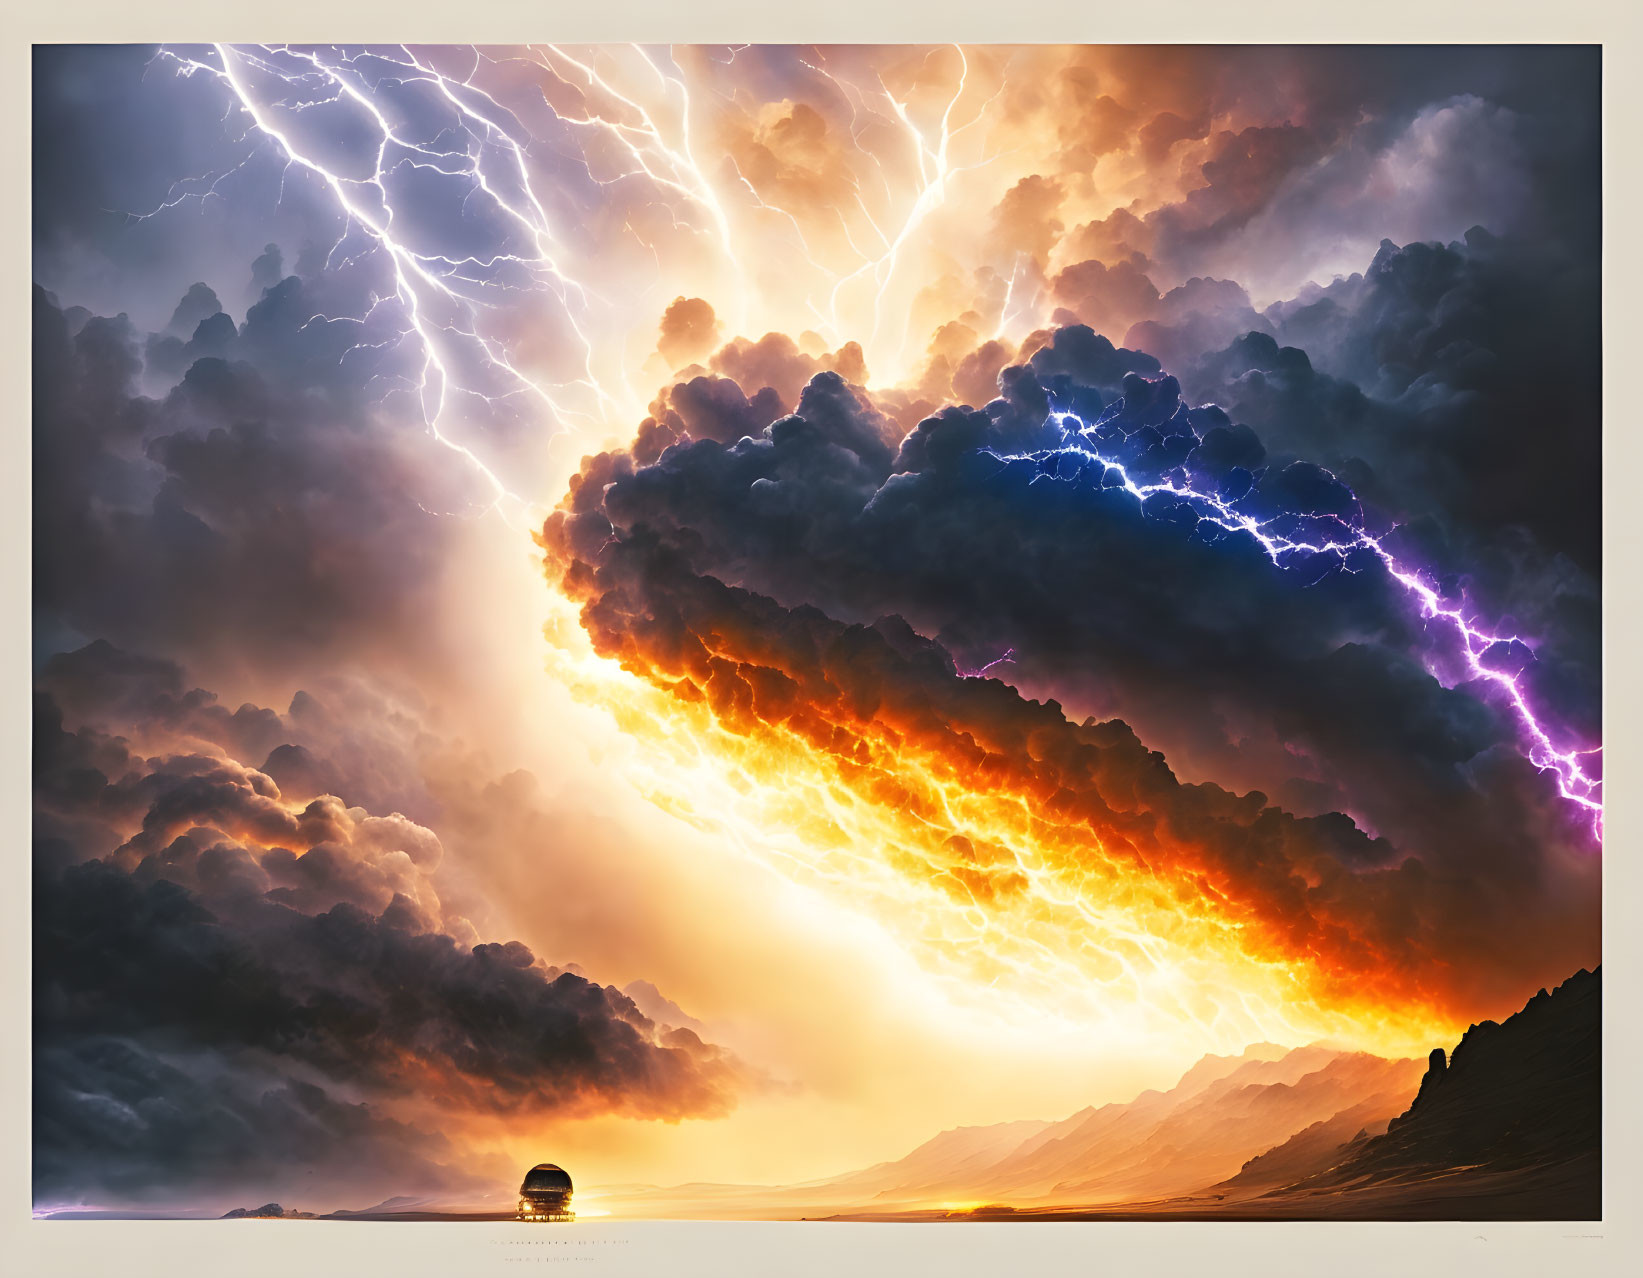 Dramatic scene: ominous thundercloud with violet lightning bolts and fiery sunset over mountains